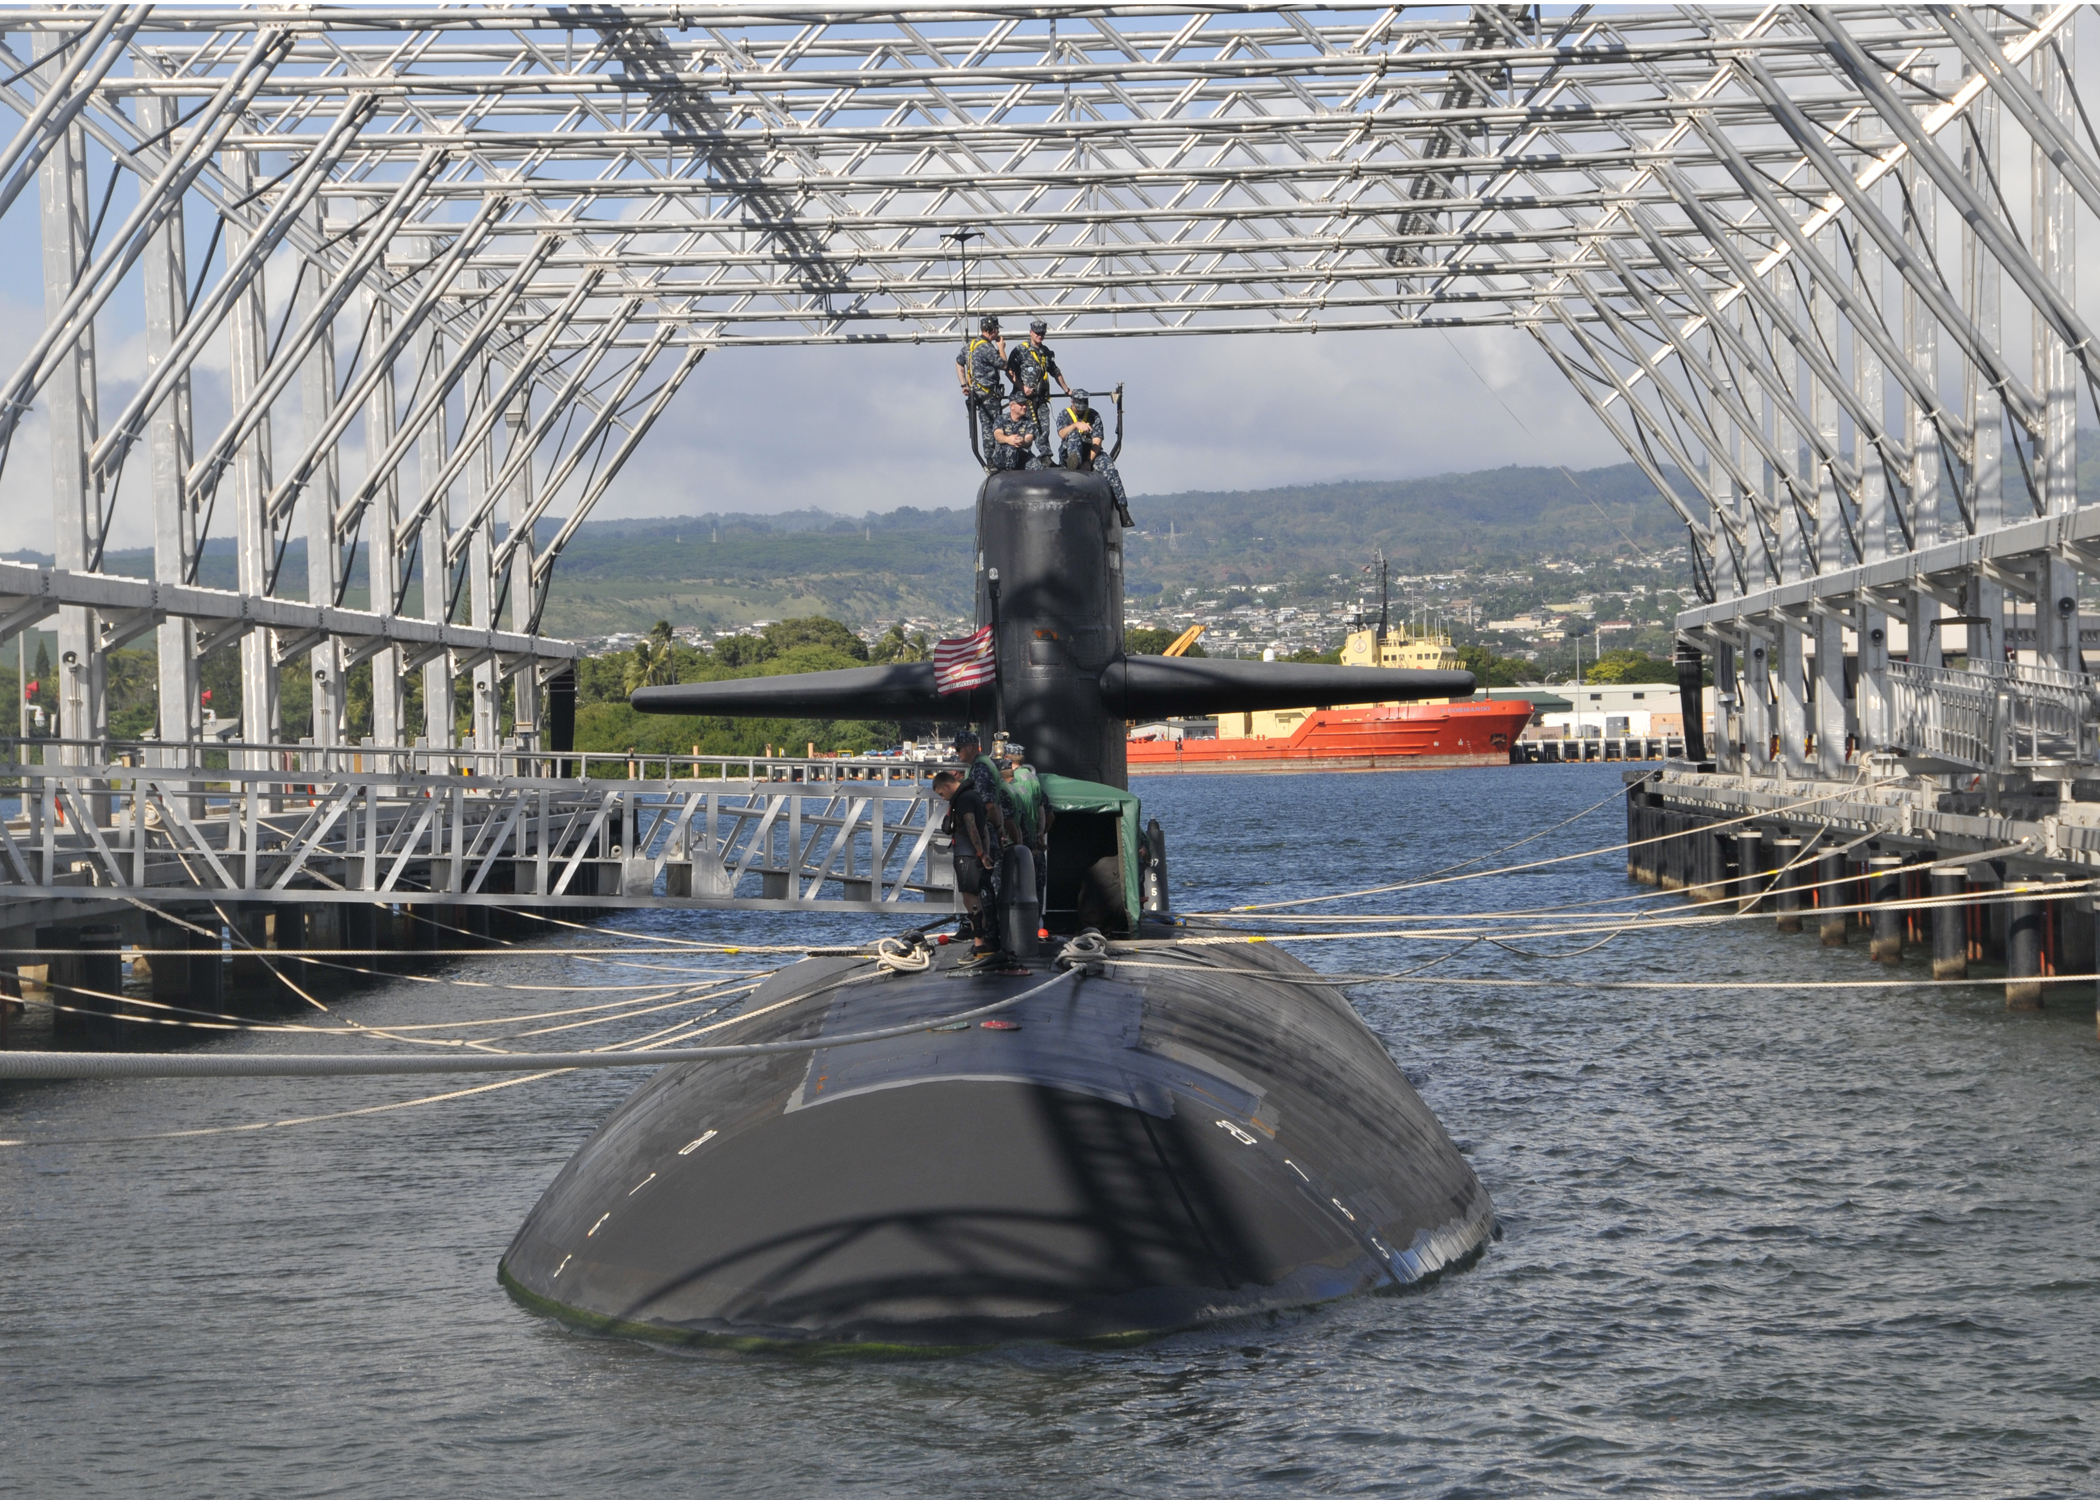 US_Navy_111215-N-UK333-030_The_Los_Angeles-class_attack_submarine_USS_Olympia_%28SSN_717%29_conducts_deperming_at_the_new_drive-in_submarine_magnetic_s.jpg